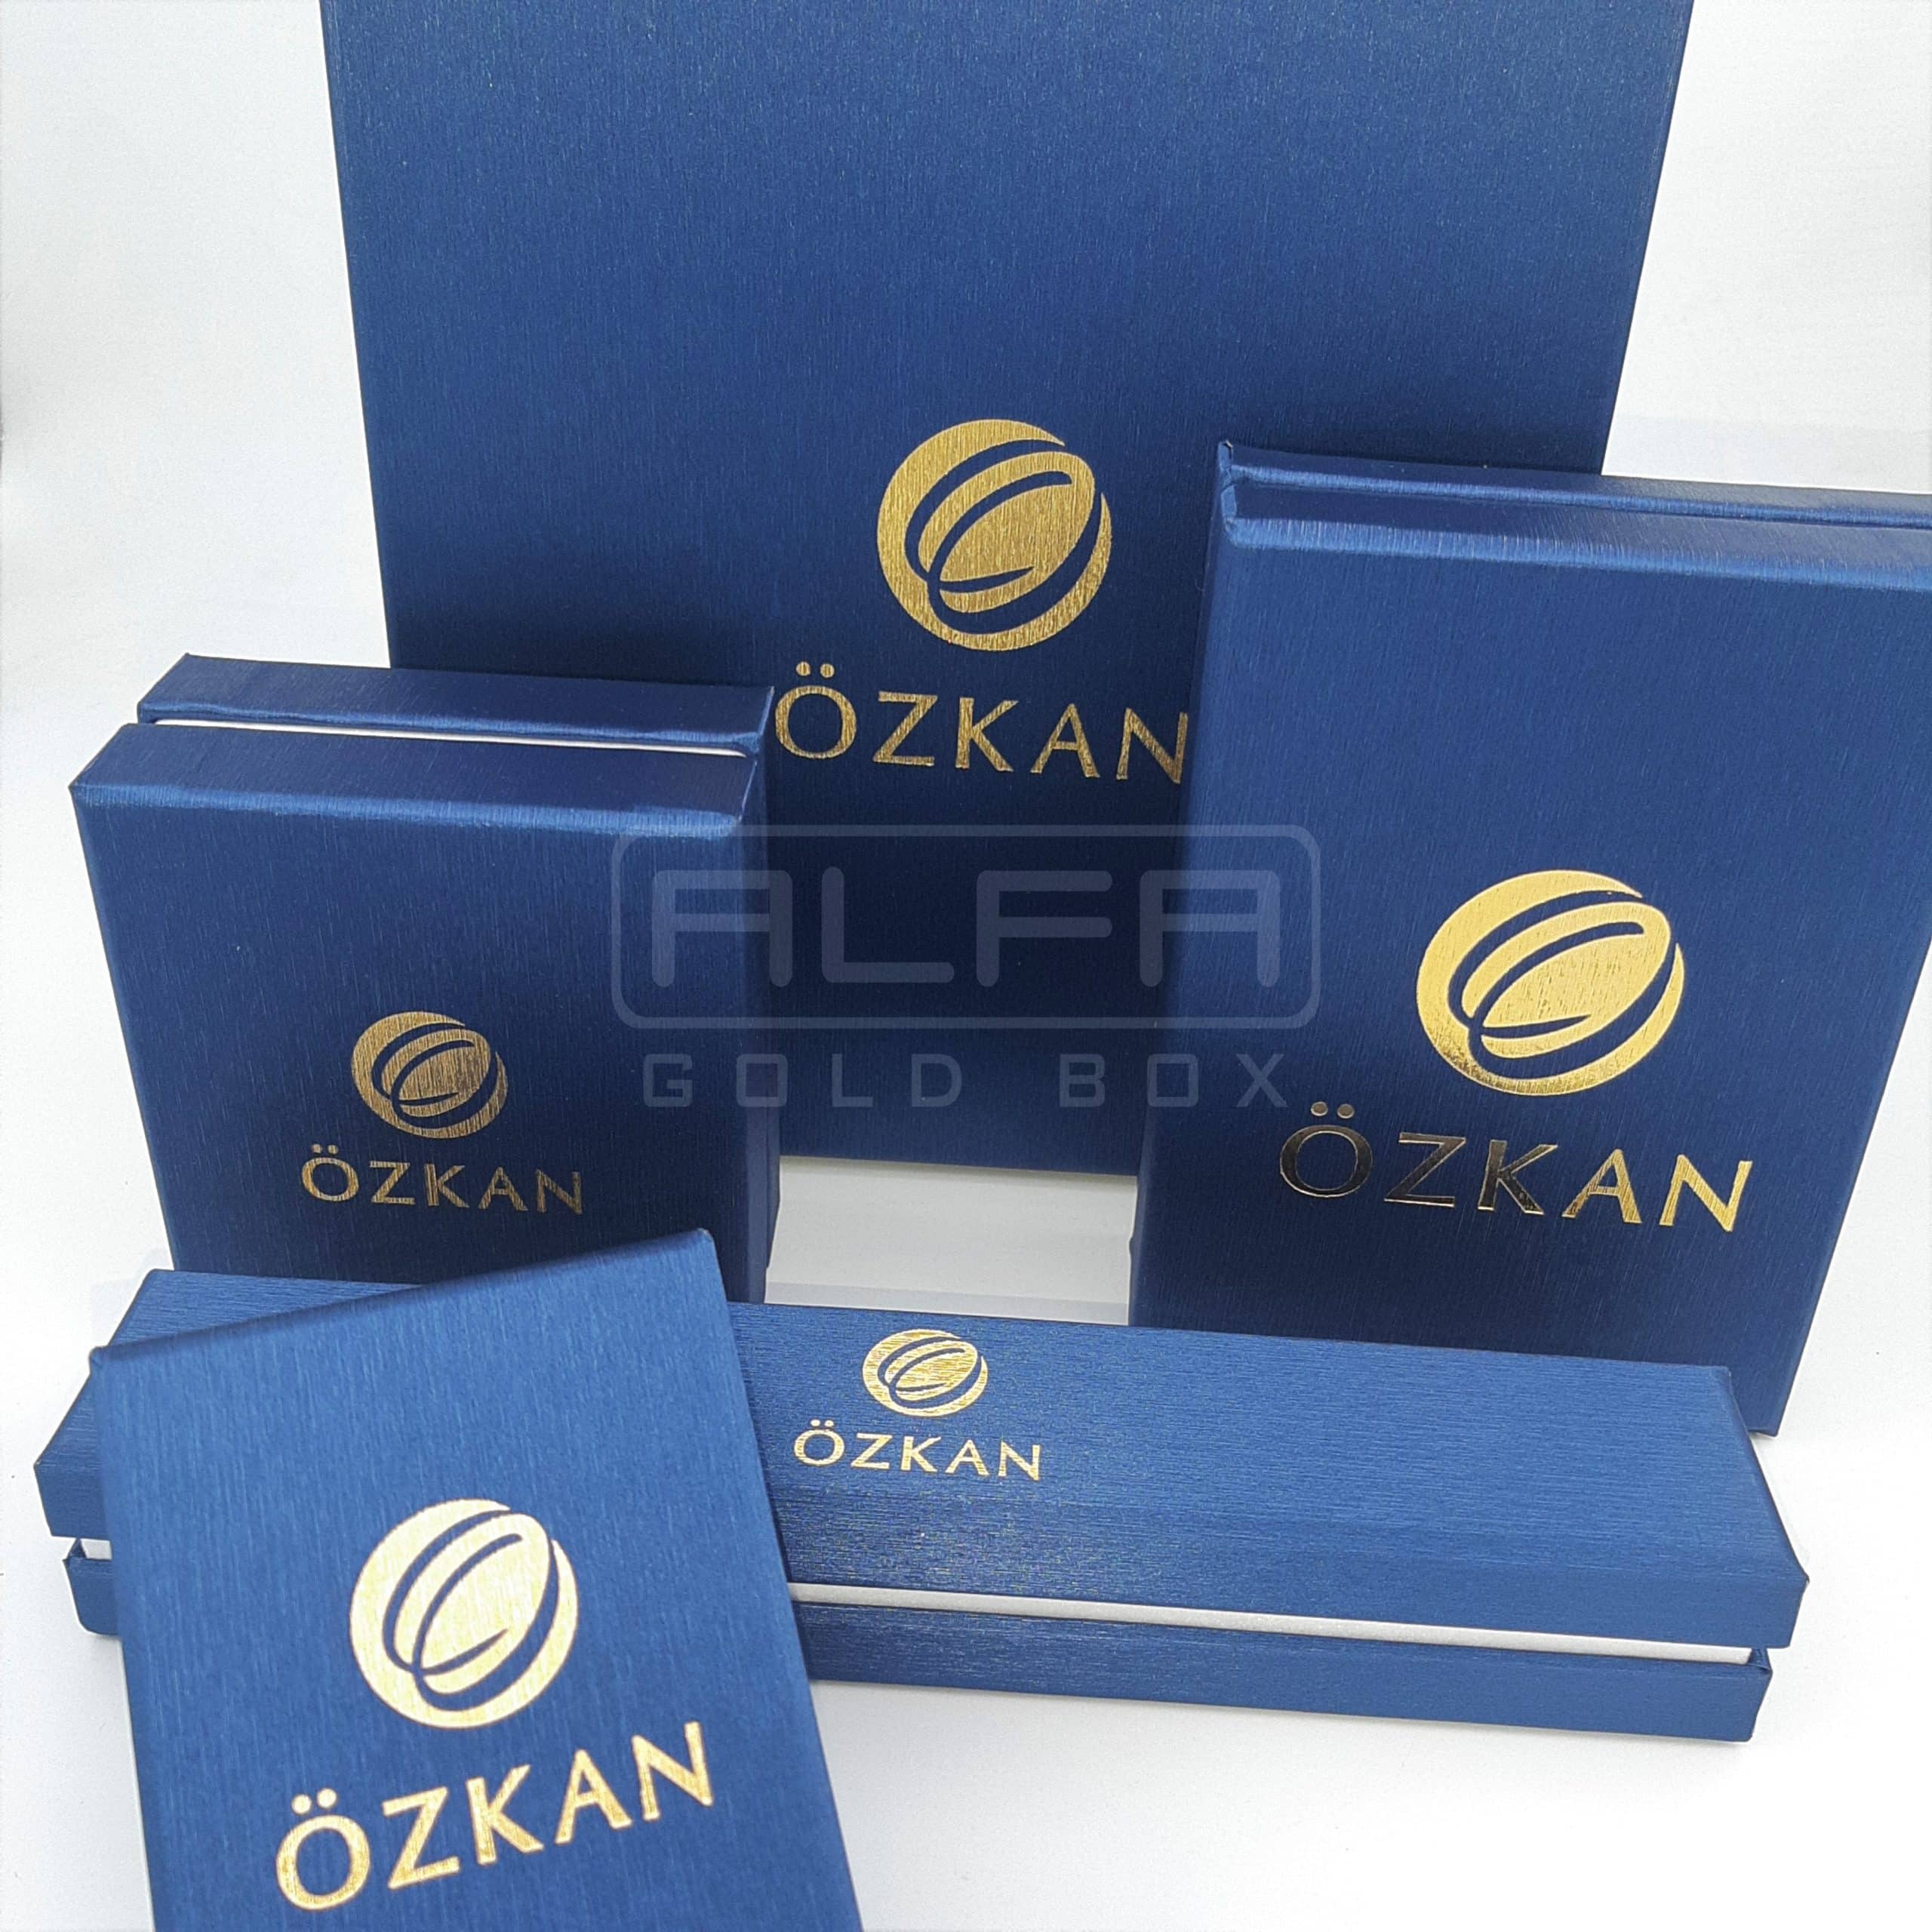 darkblue leatherette jewelry boxes